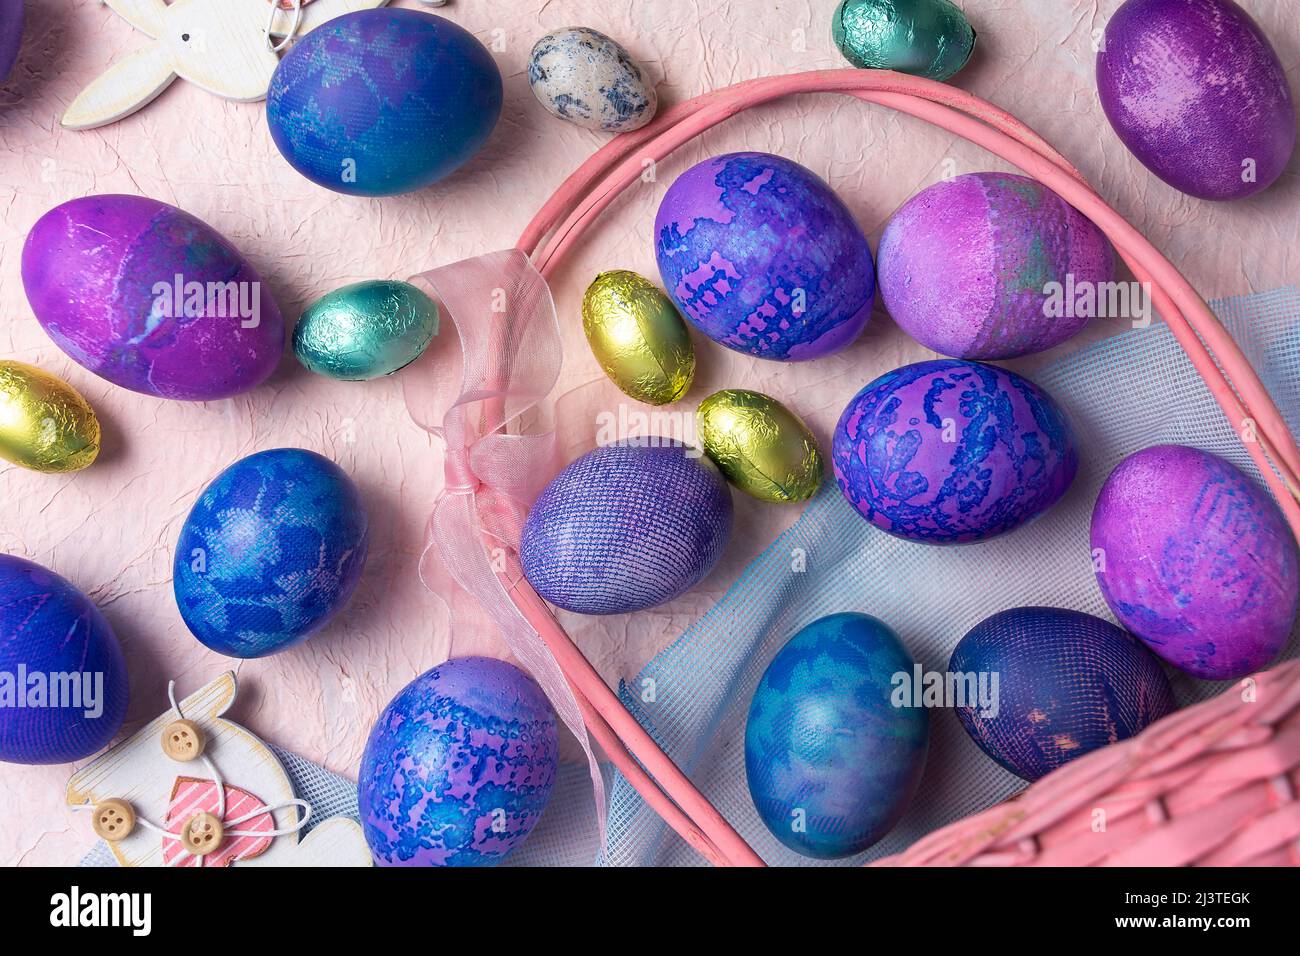 Purple and blue Easter eggs with on a pastel background. Stock Photo